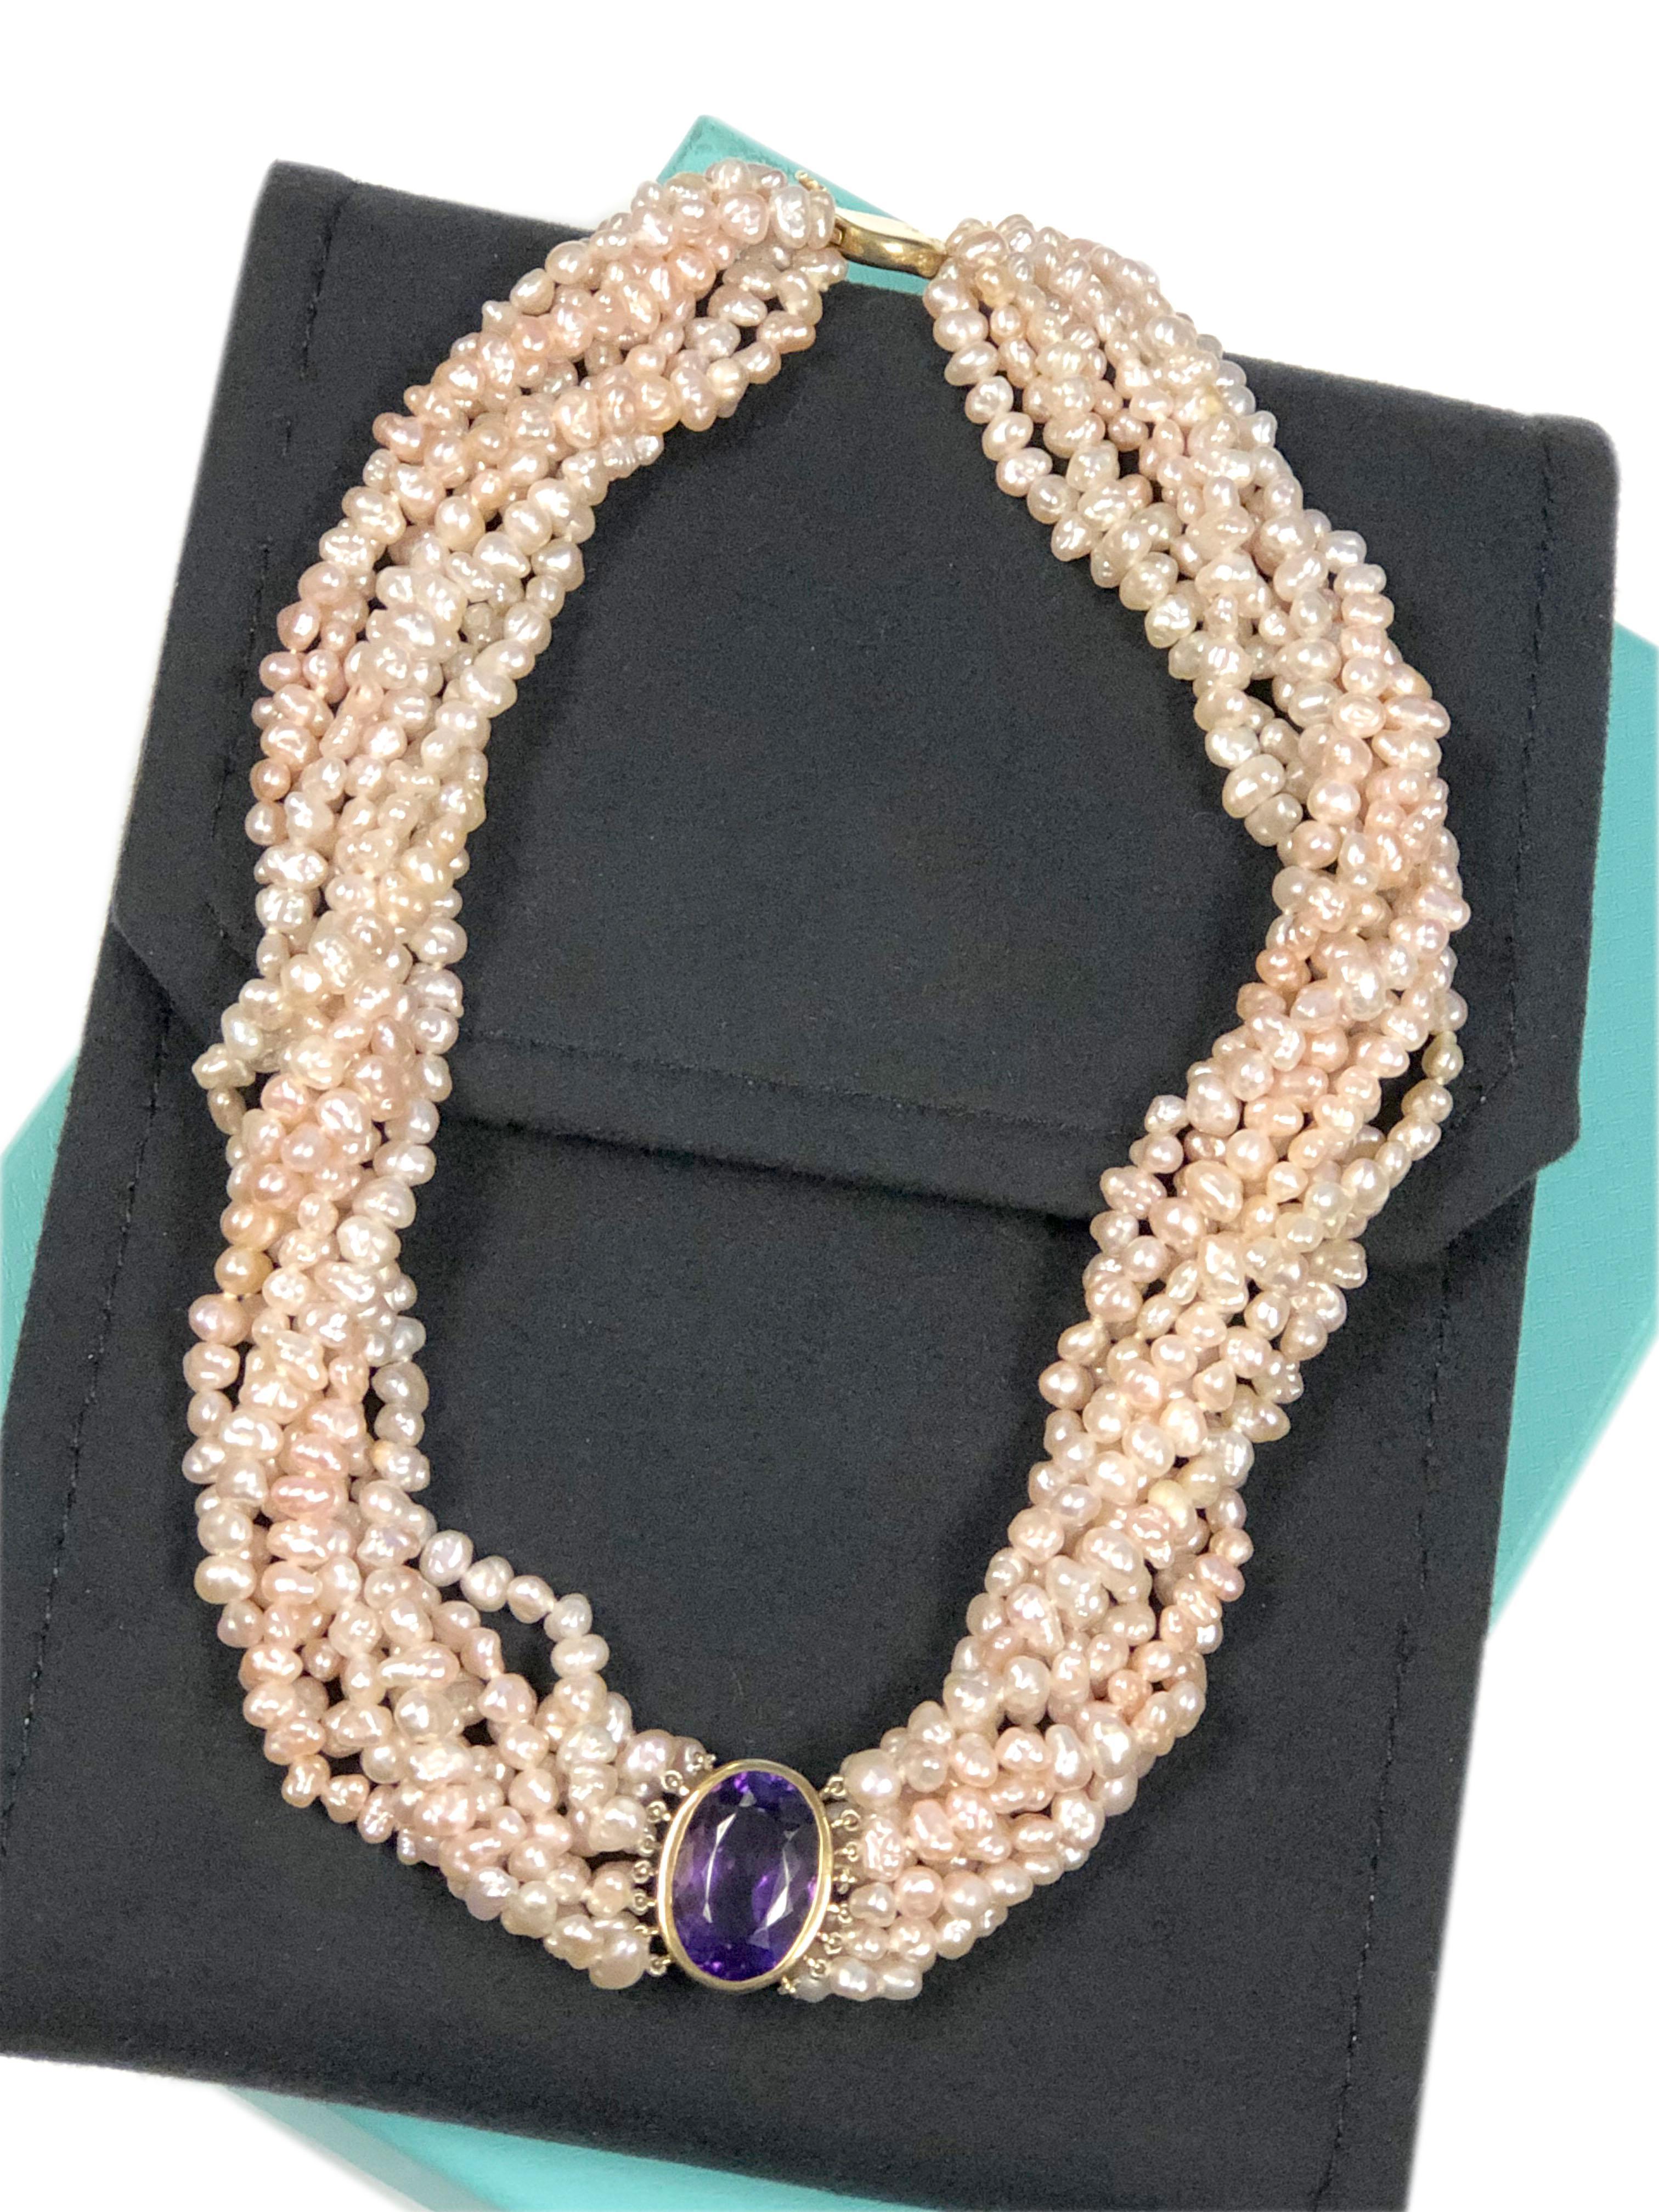 Tiffany & Company Gold Amethyst and Pearl Torasde Necklace 3